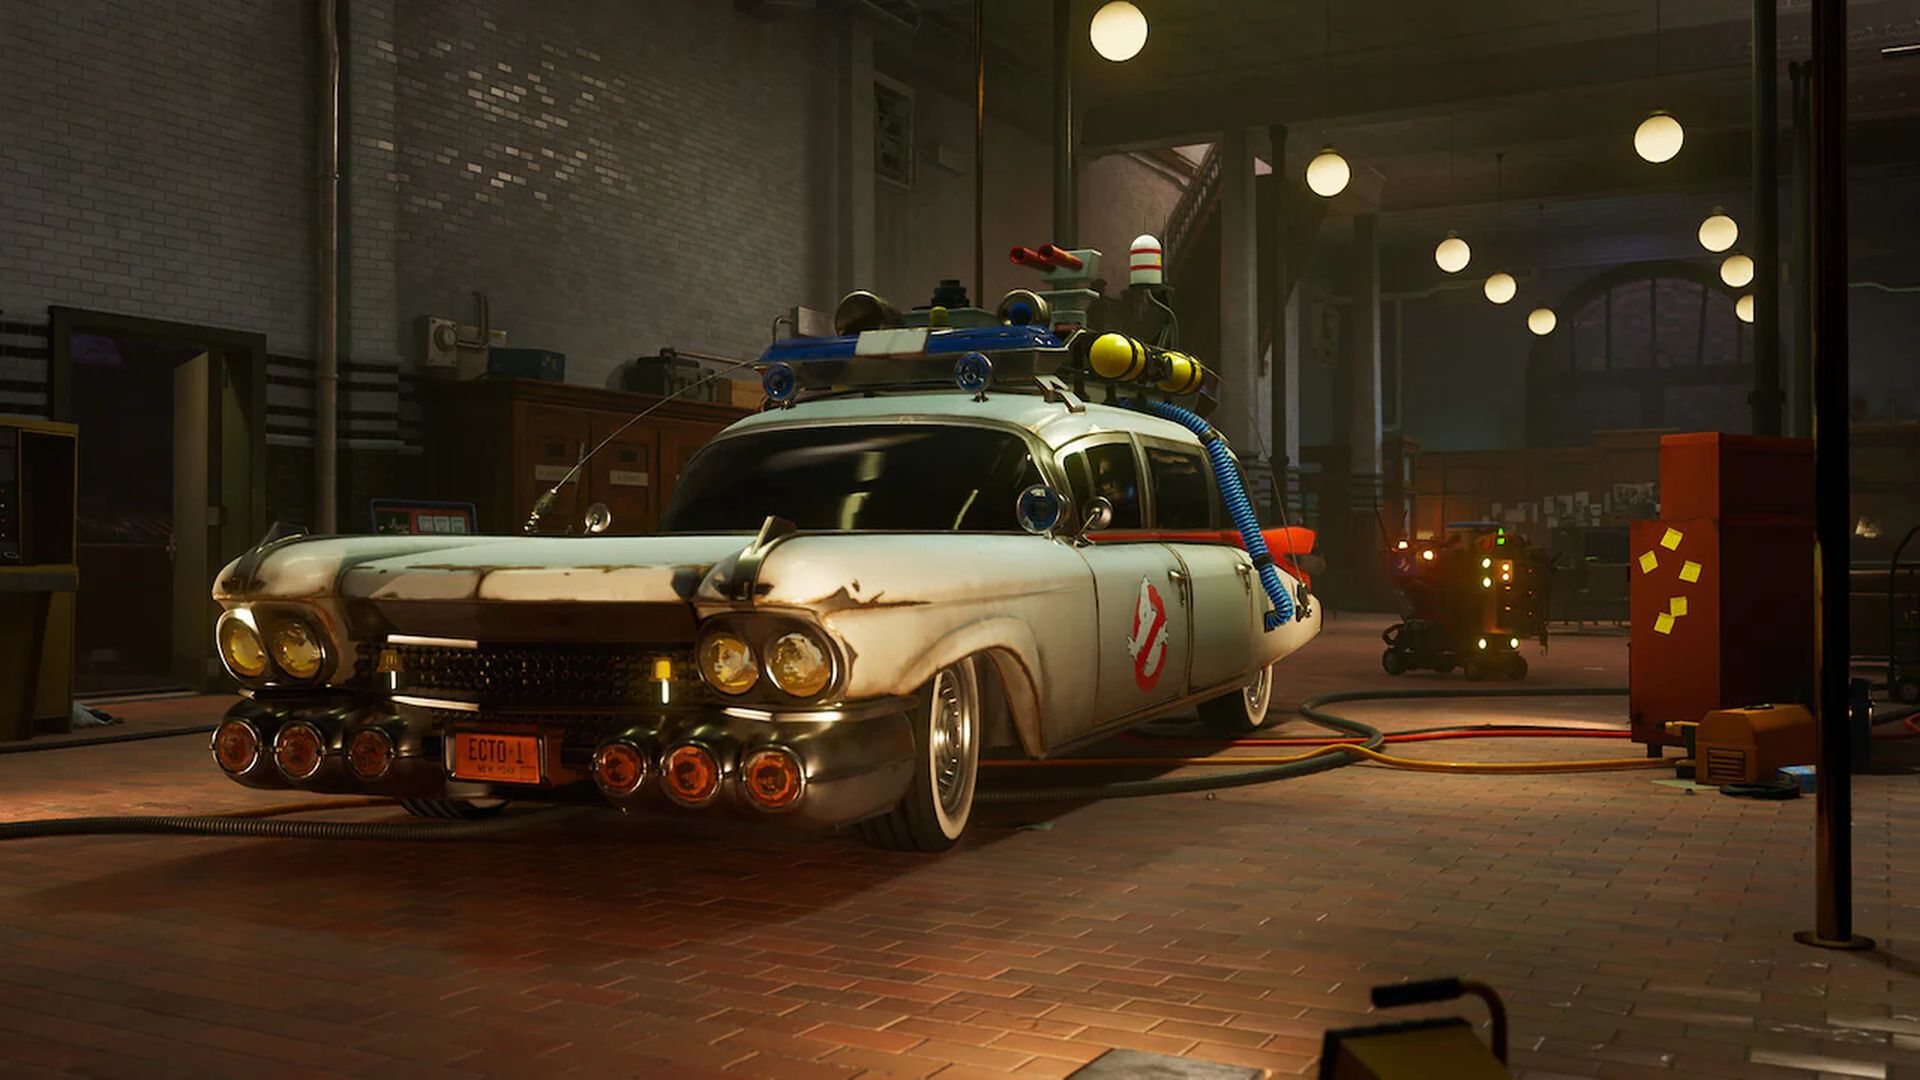 In this article, we are going to be covering Ghostbusters Spirits Unleashed single player, going over the AI of the game, and our general thoughts on the game itself as a whole.